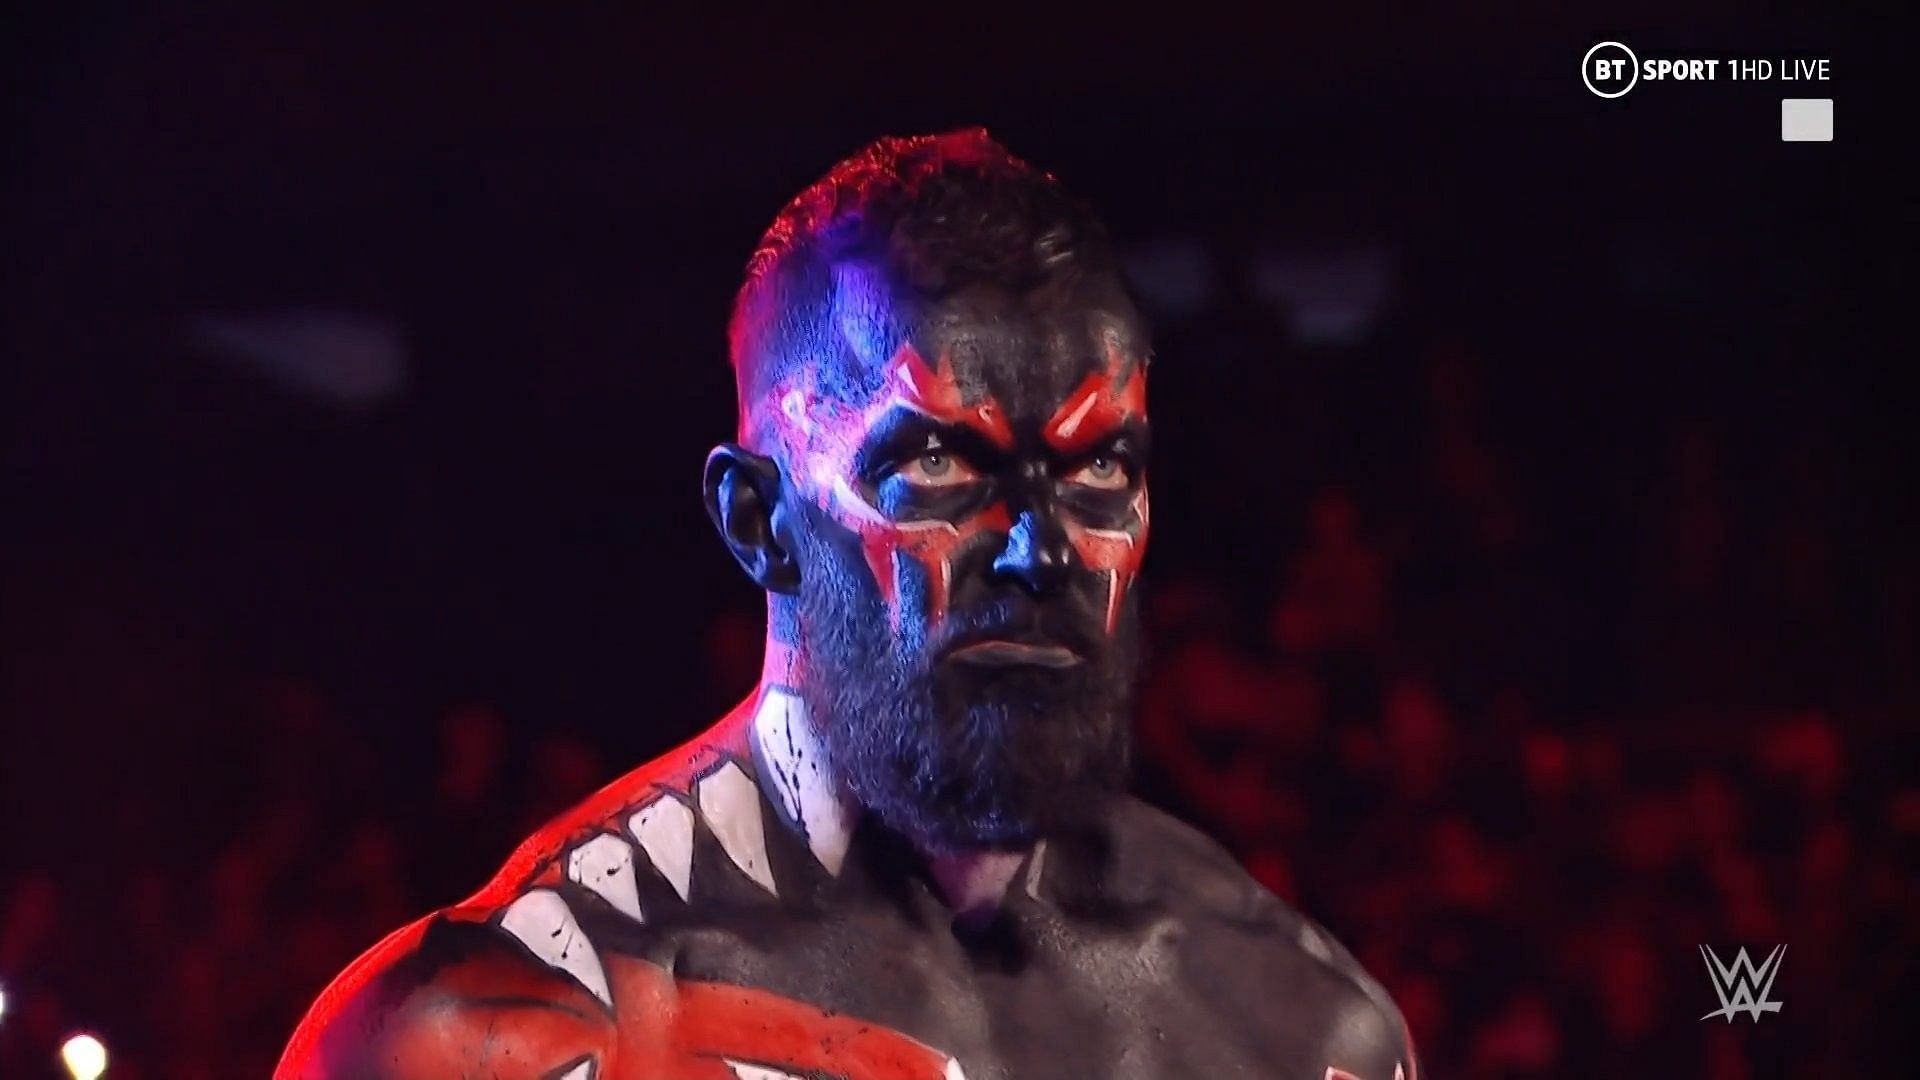 Balor may be ordered to save his inner demon for the biggest stages